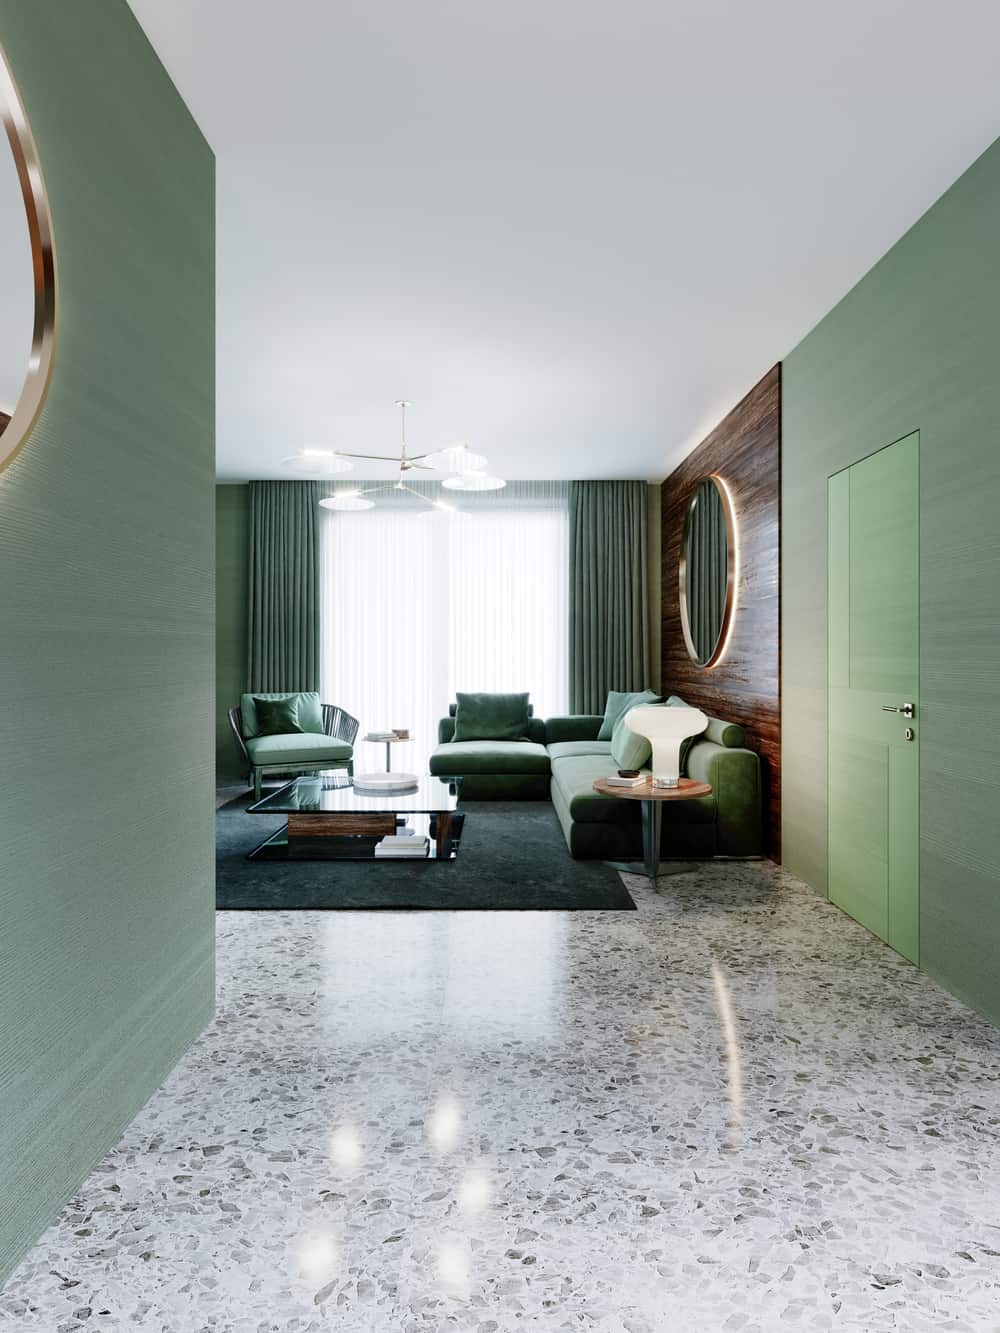 Passage from the corridor to the living room, interior in green colors. 3D rendering.